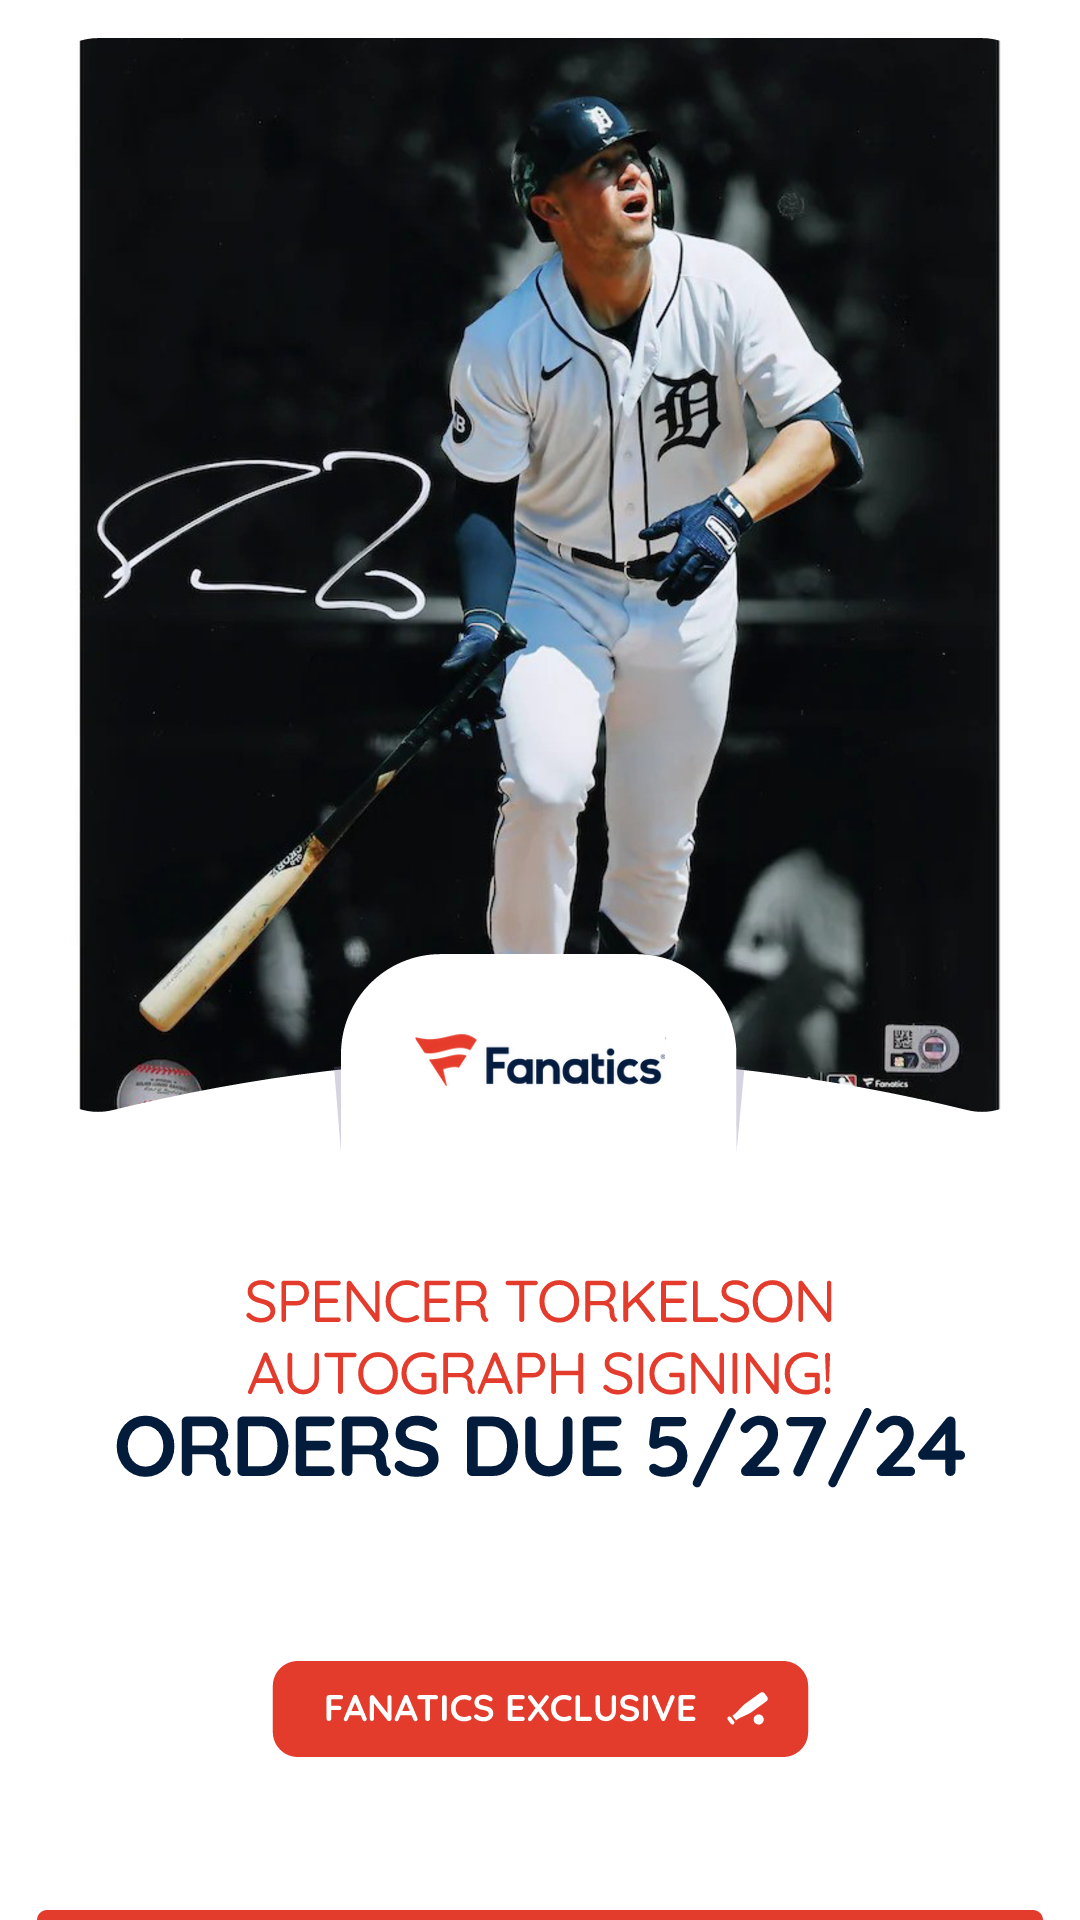 Spencer Torkelson Autograph Signing-Powers Sports Memorabilia